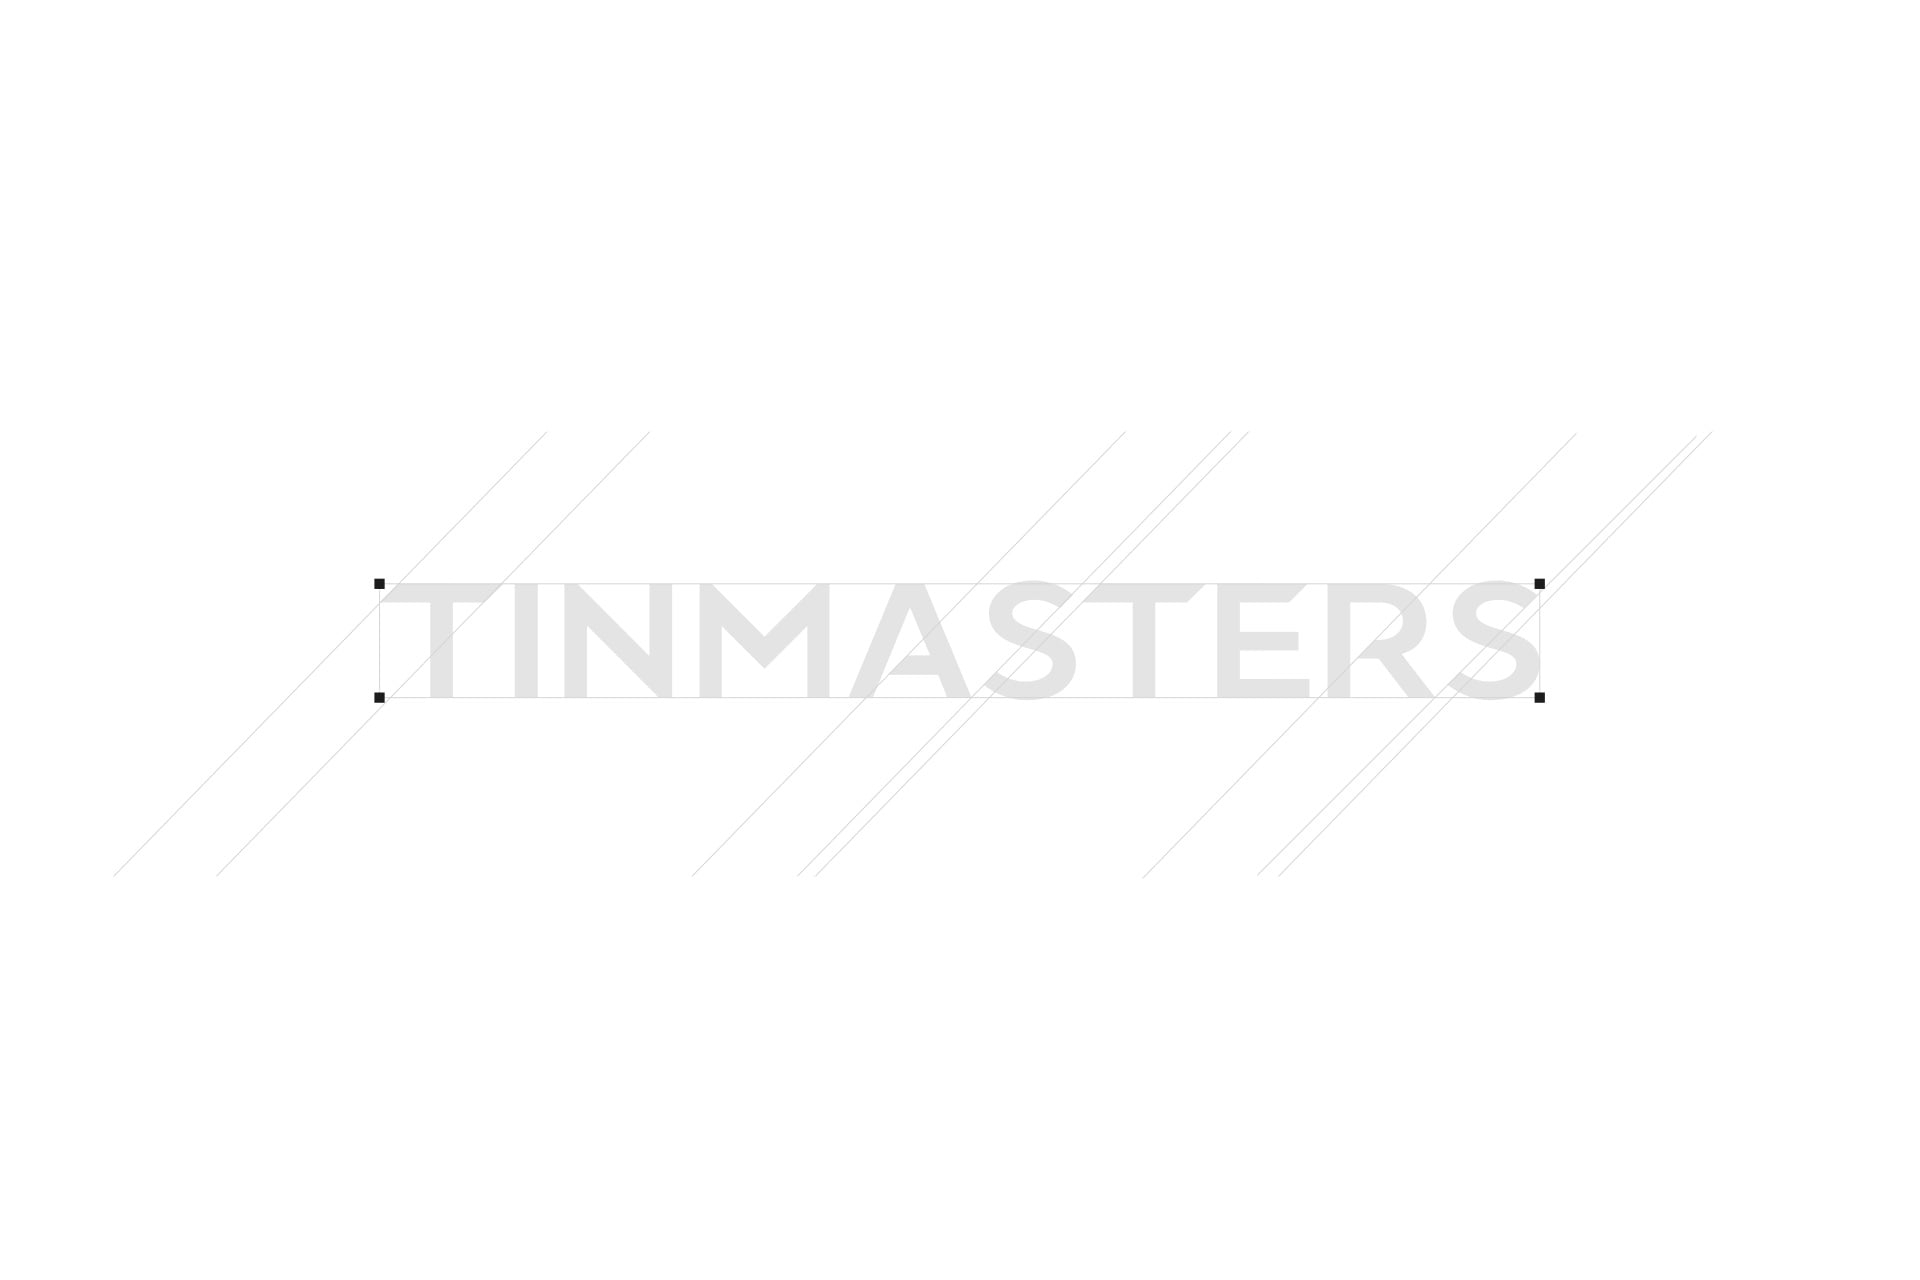 creation of the new Tinmasters logo